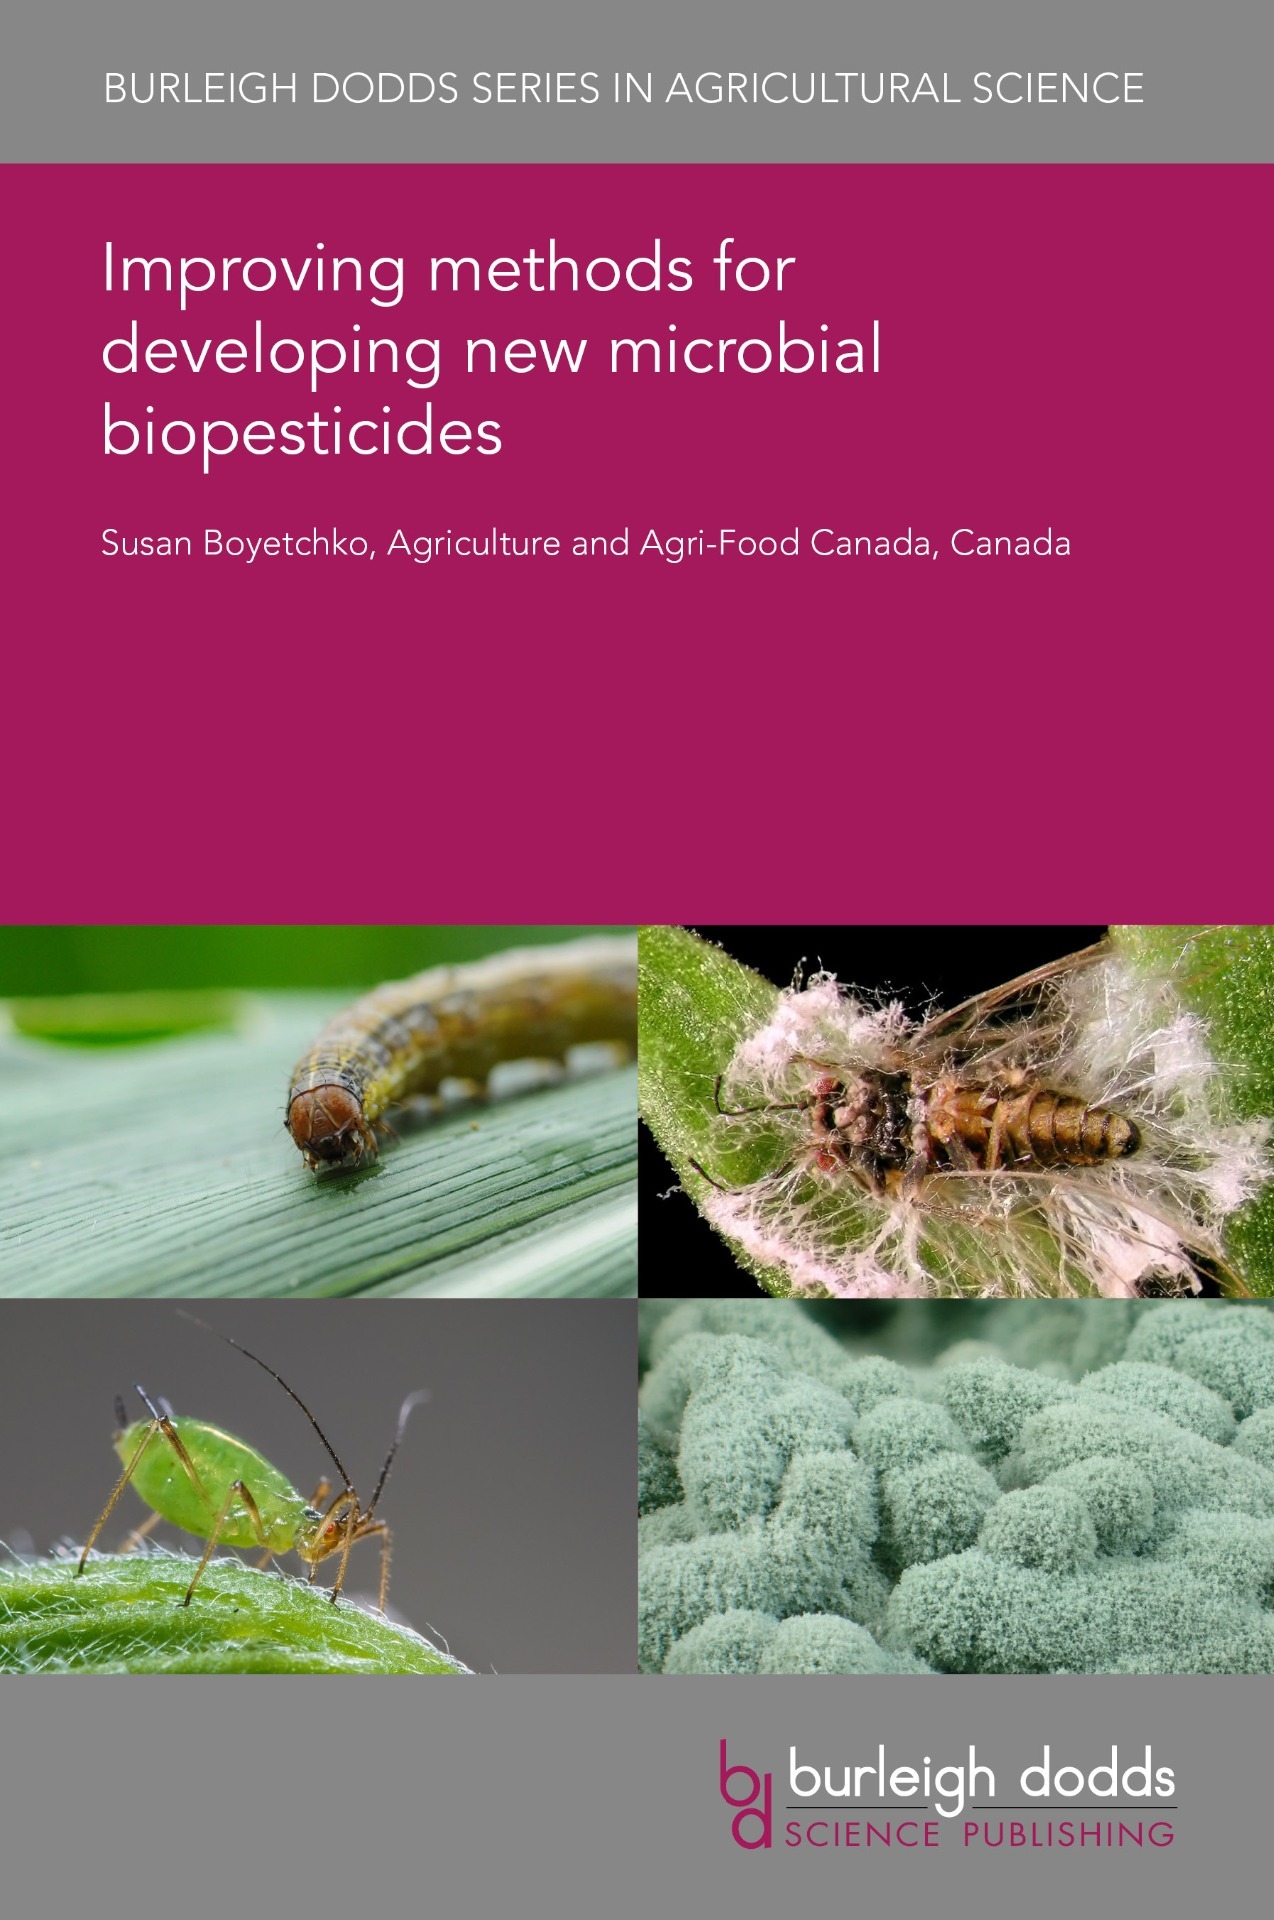 Improving methods for developing new microbial biopesticides